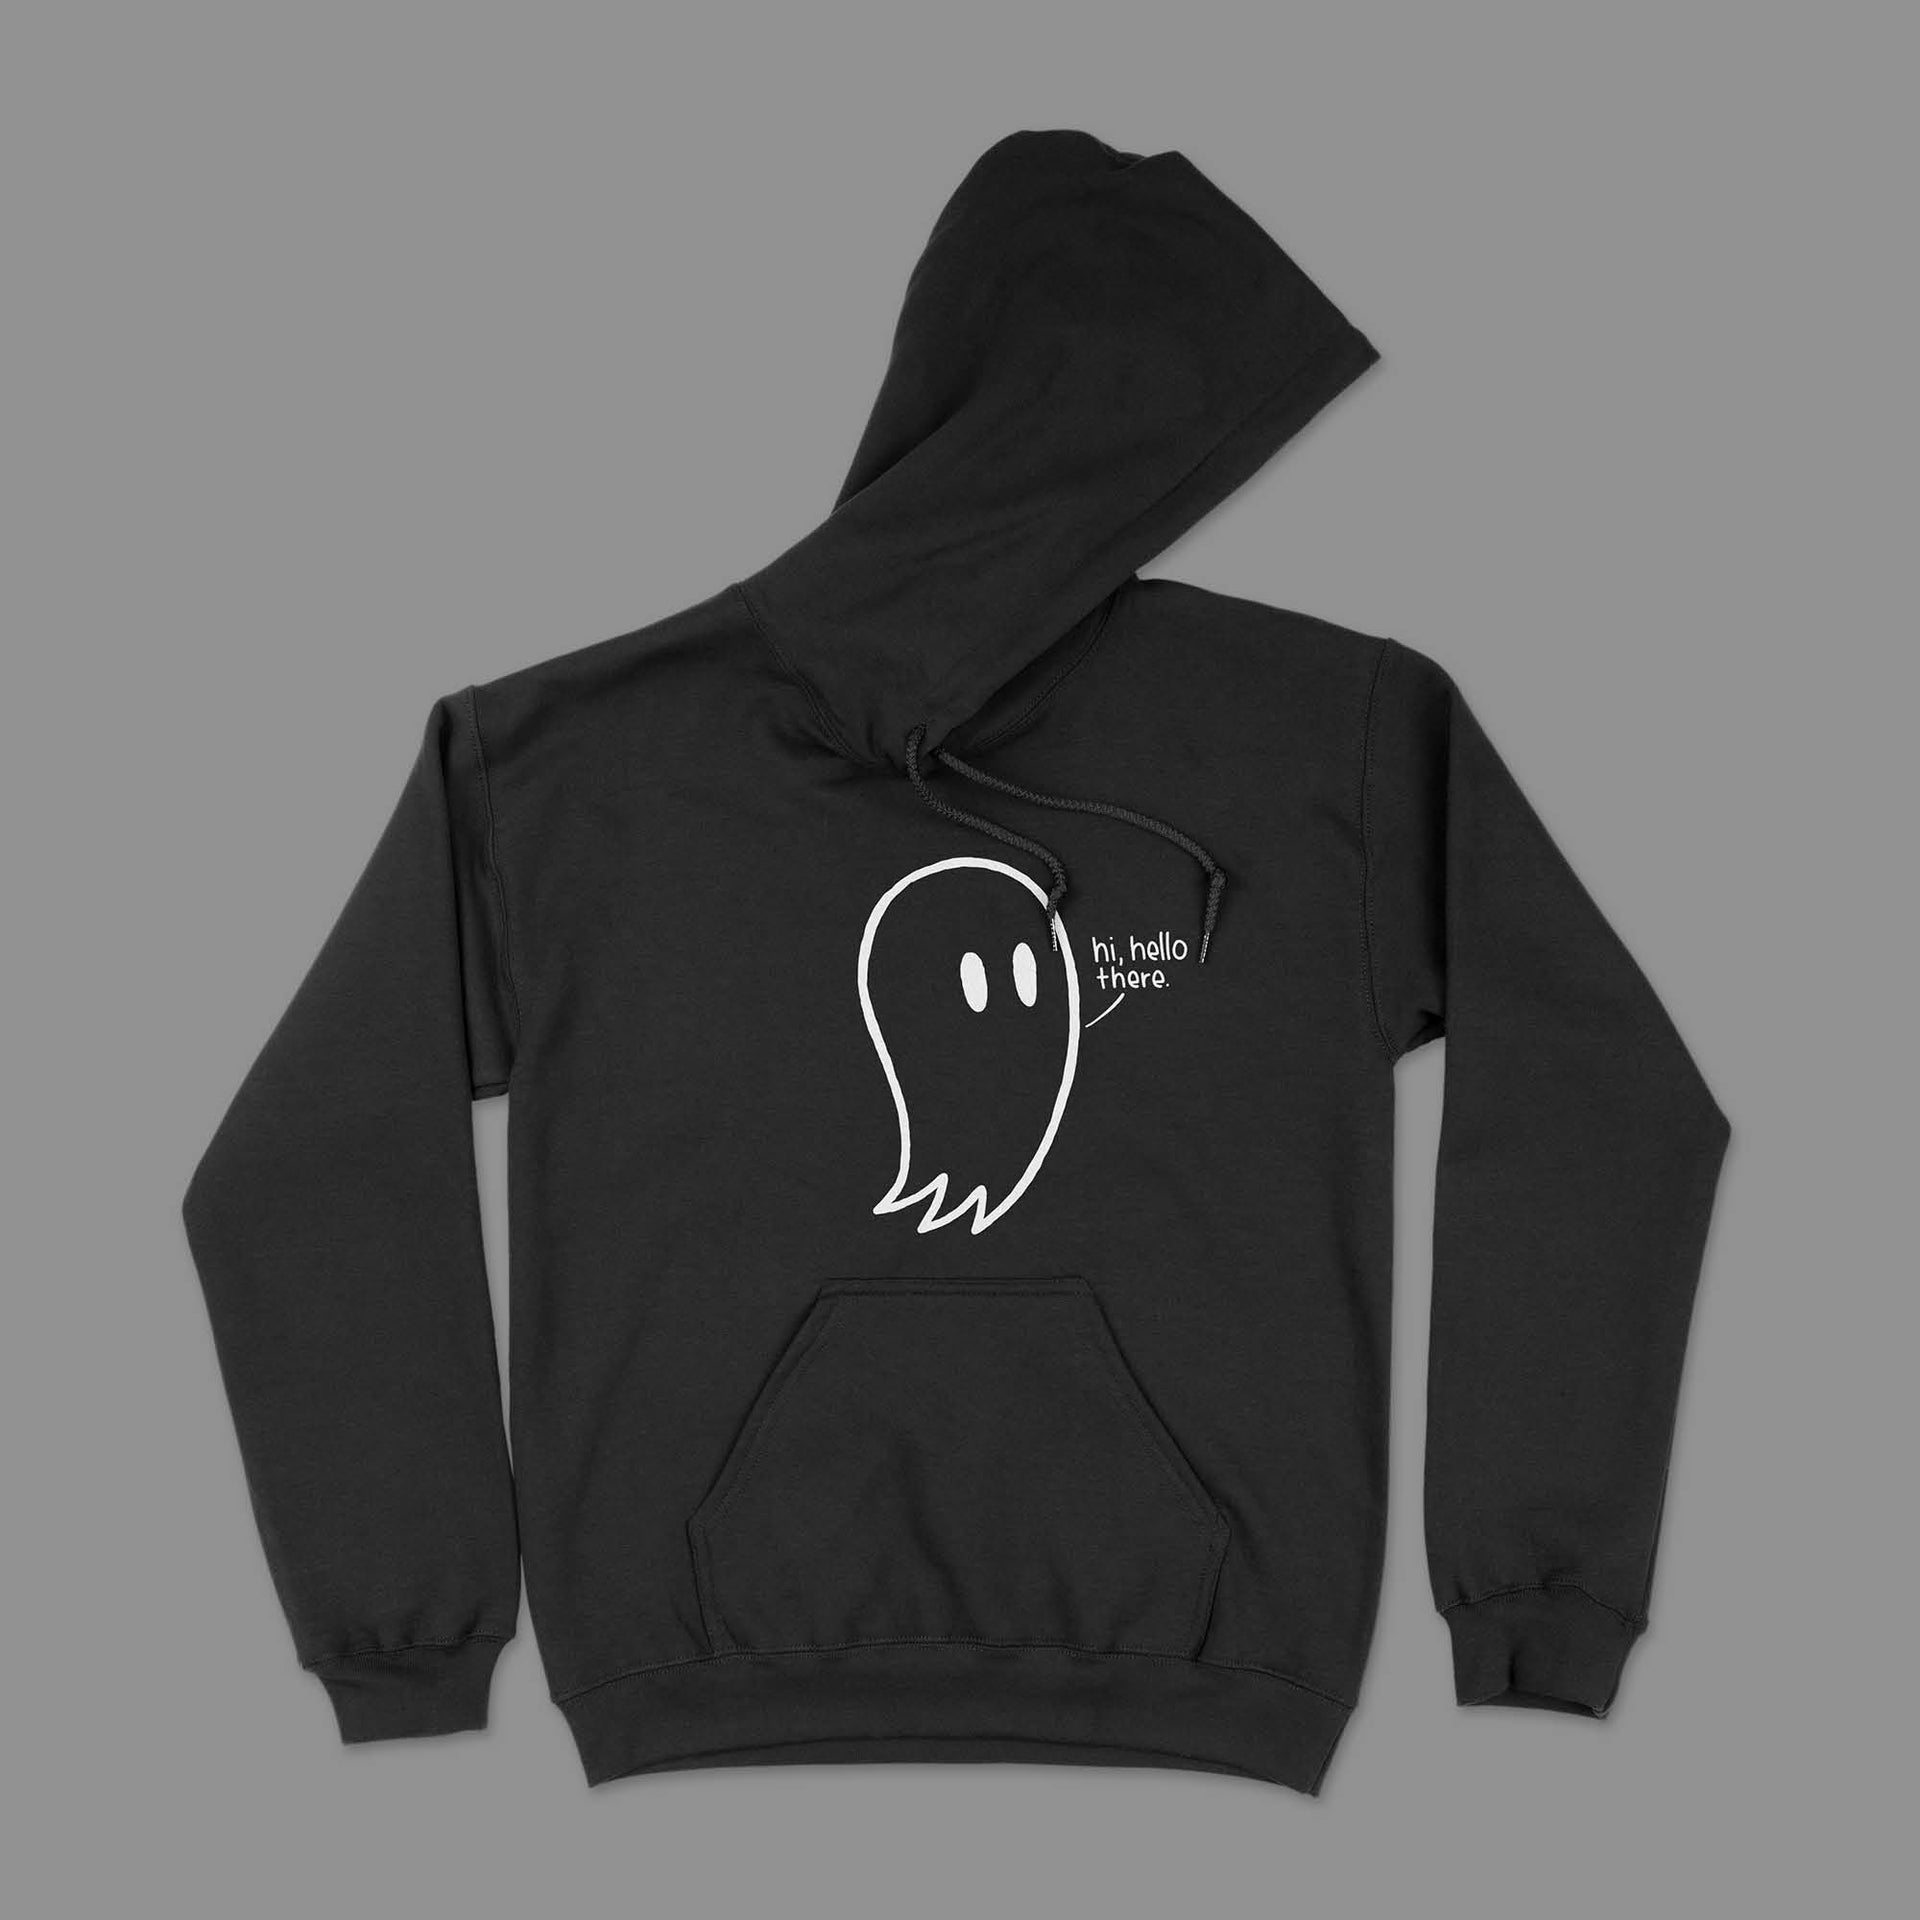 A black hoodie featuring a cute ghost named Fred who is saying "hi, hello there"